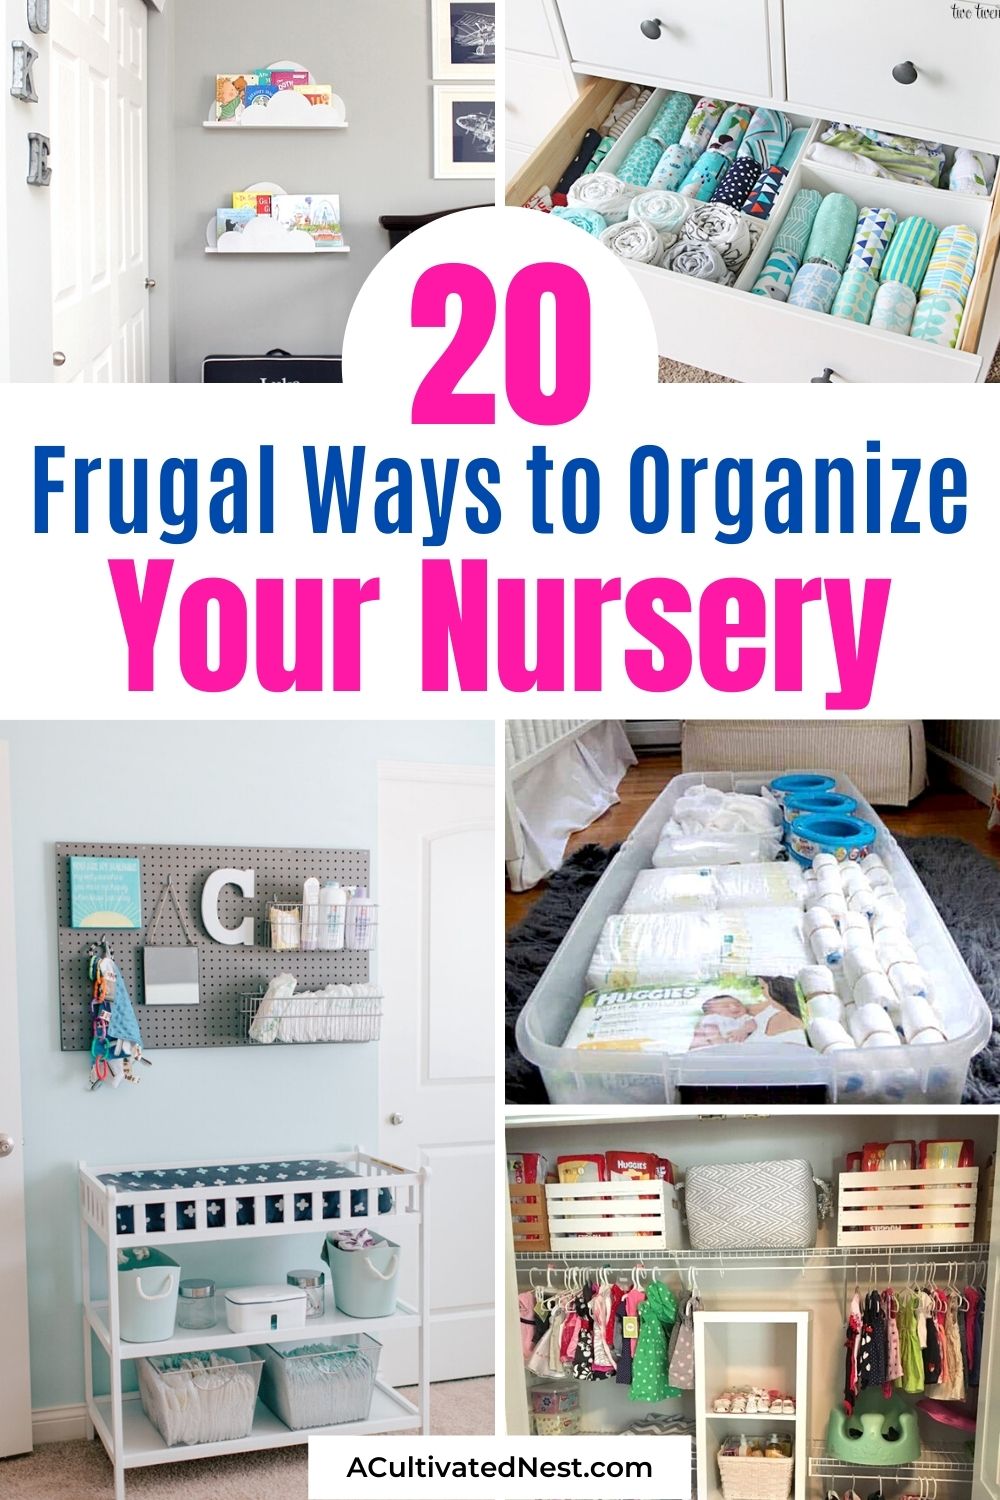 20 Frugal Nursery Organization Ideas- Get ready and organized for baby on a budget with these wonderful frugal nursery organization ideas! There are so many clever ways to organize your nursery! | #nurseryOrganization  #organizingTips #organization #nursery #ACultivatedNest